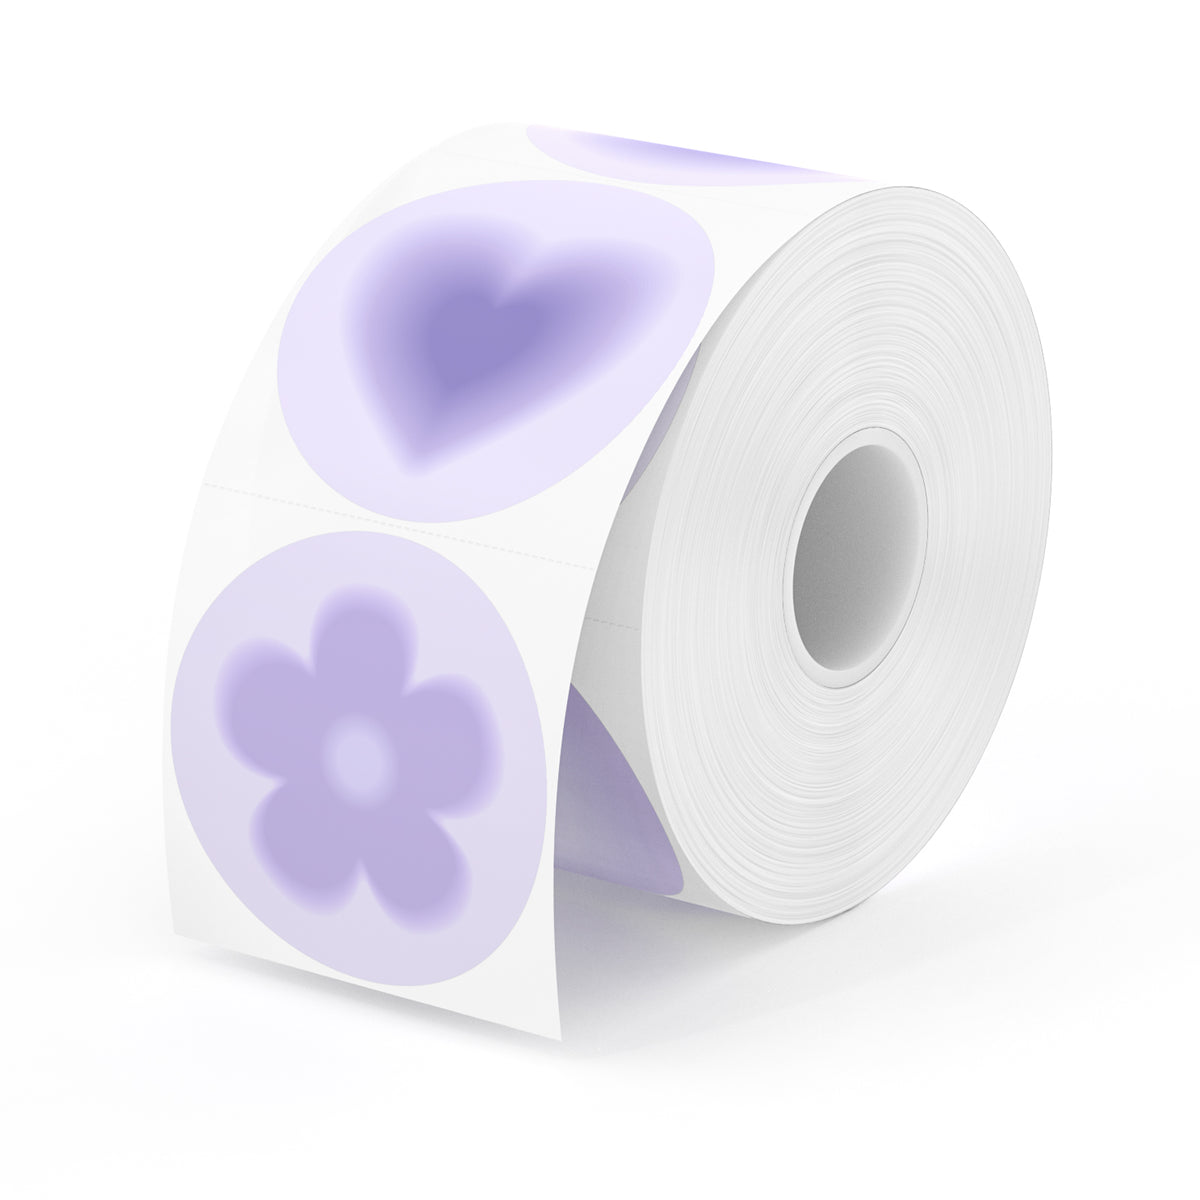 Elevate your labeling game with MUNBYN's 6-in-1 Purple Decorative Round Label Rolls, where each roll has six charming purple patterns.